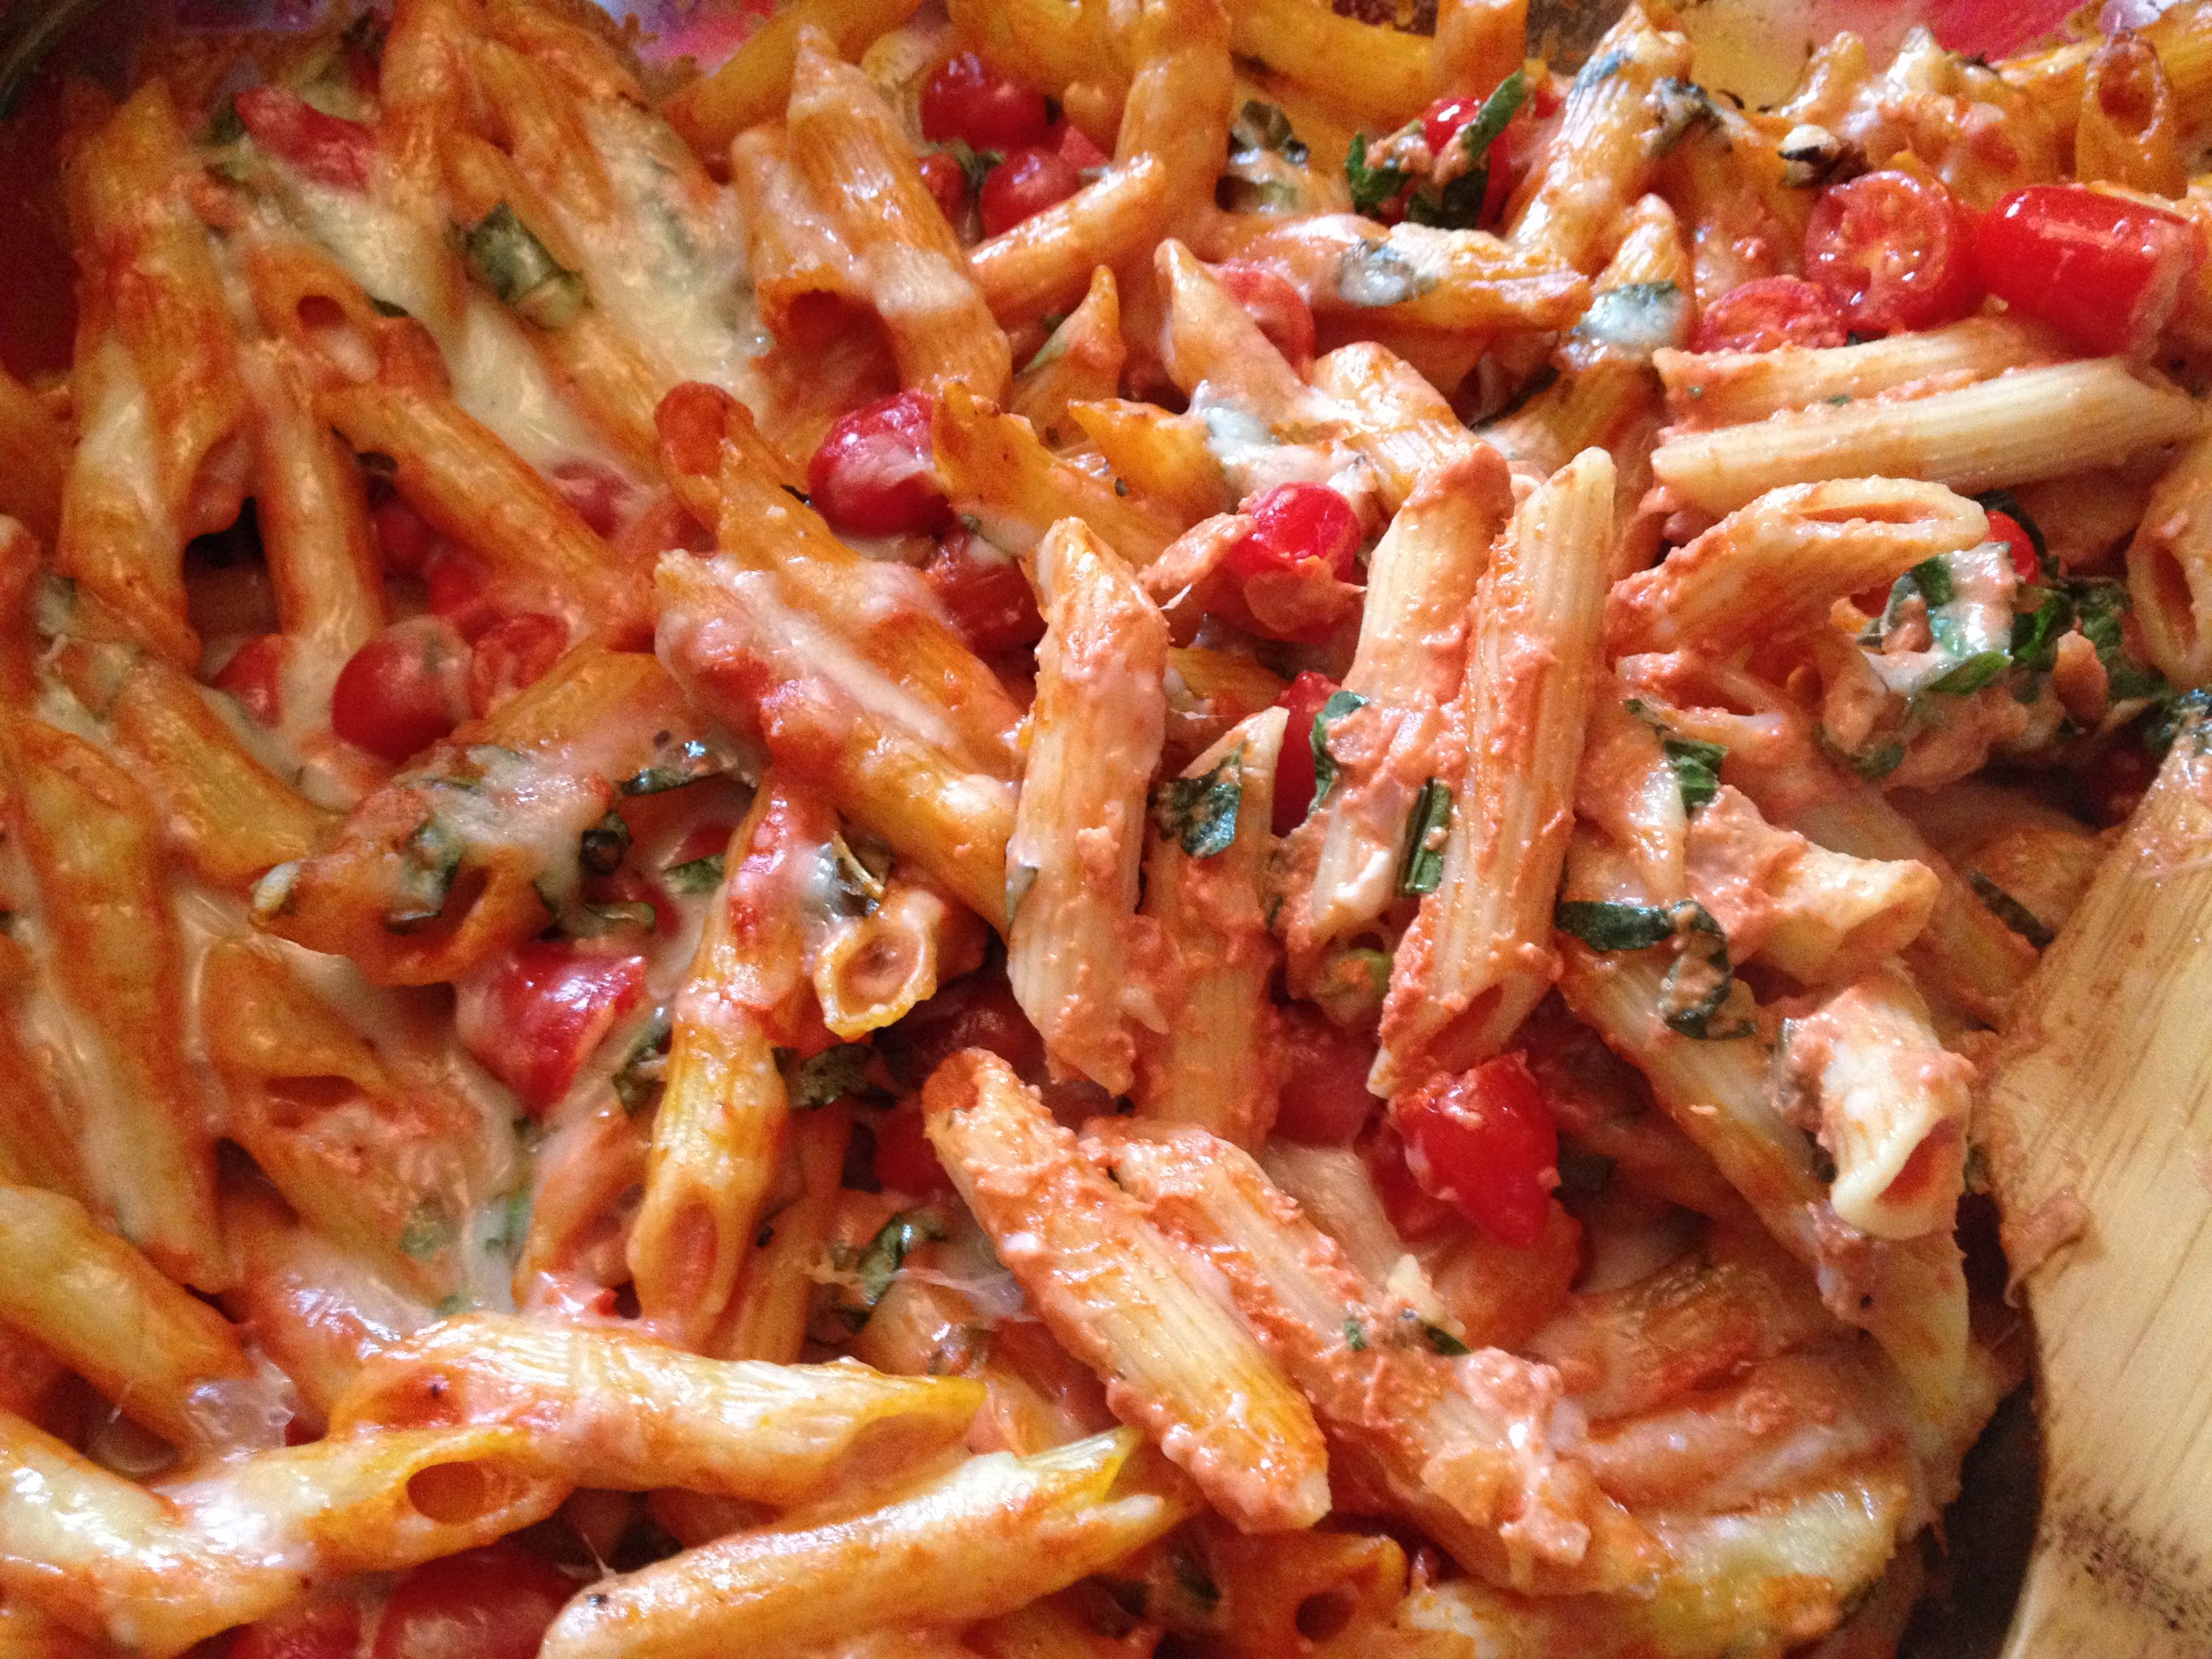 Creamy Pasta Bake with Cherry Tomatoes and Basil